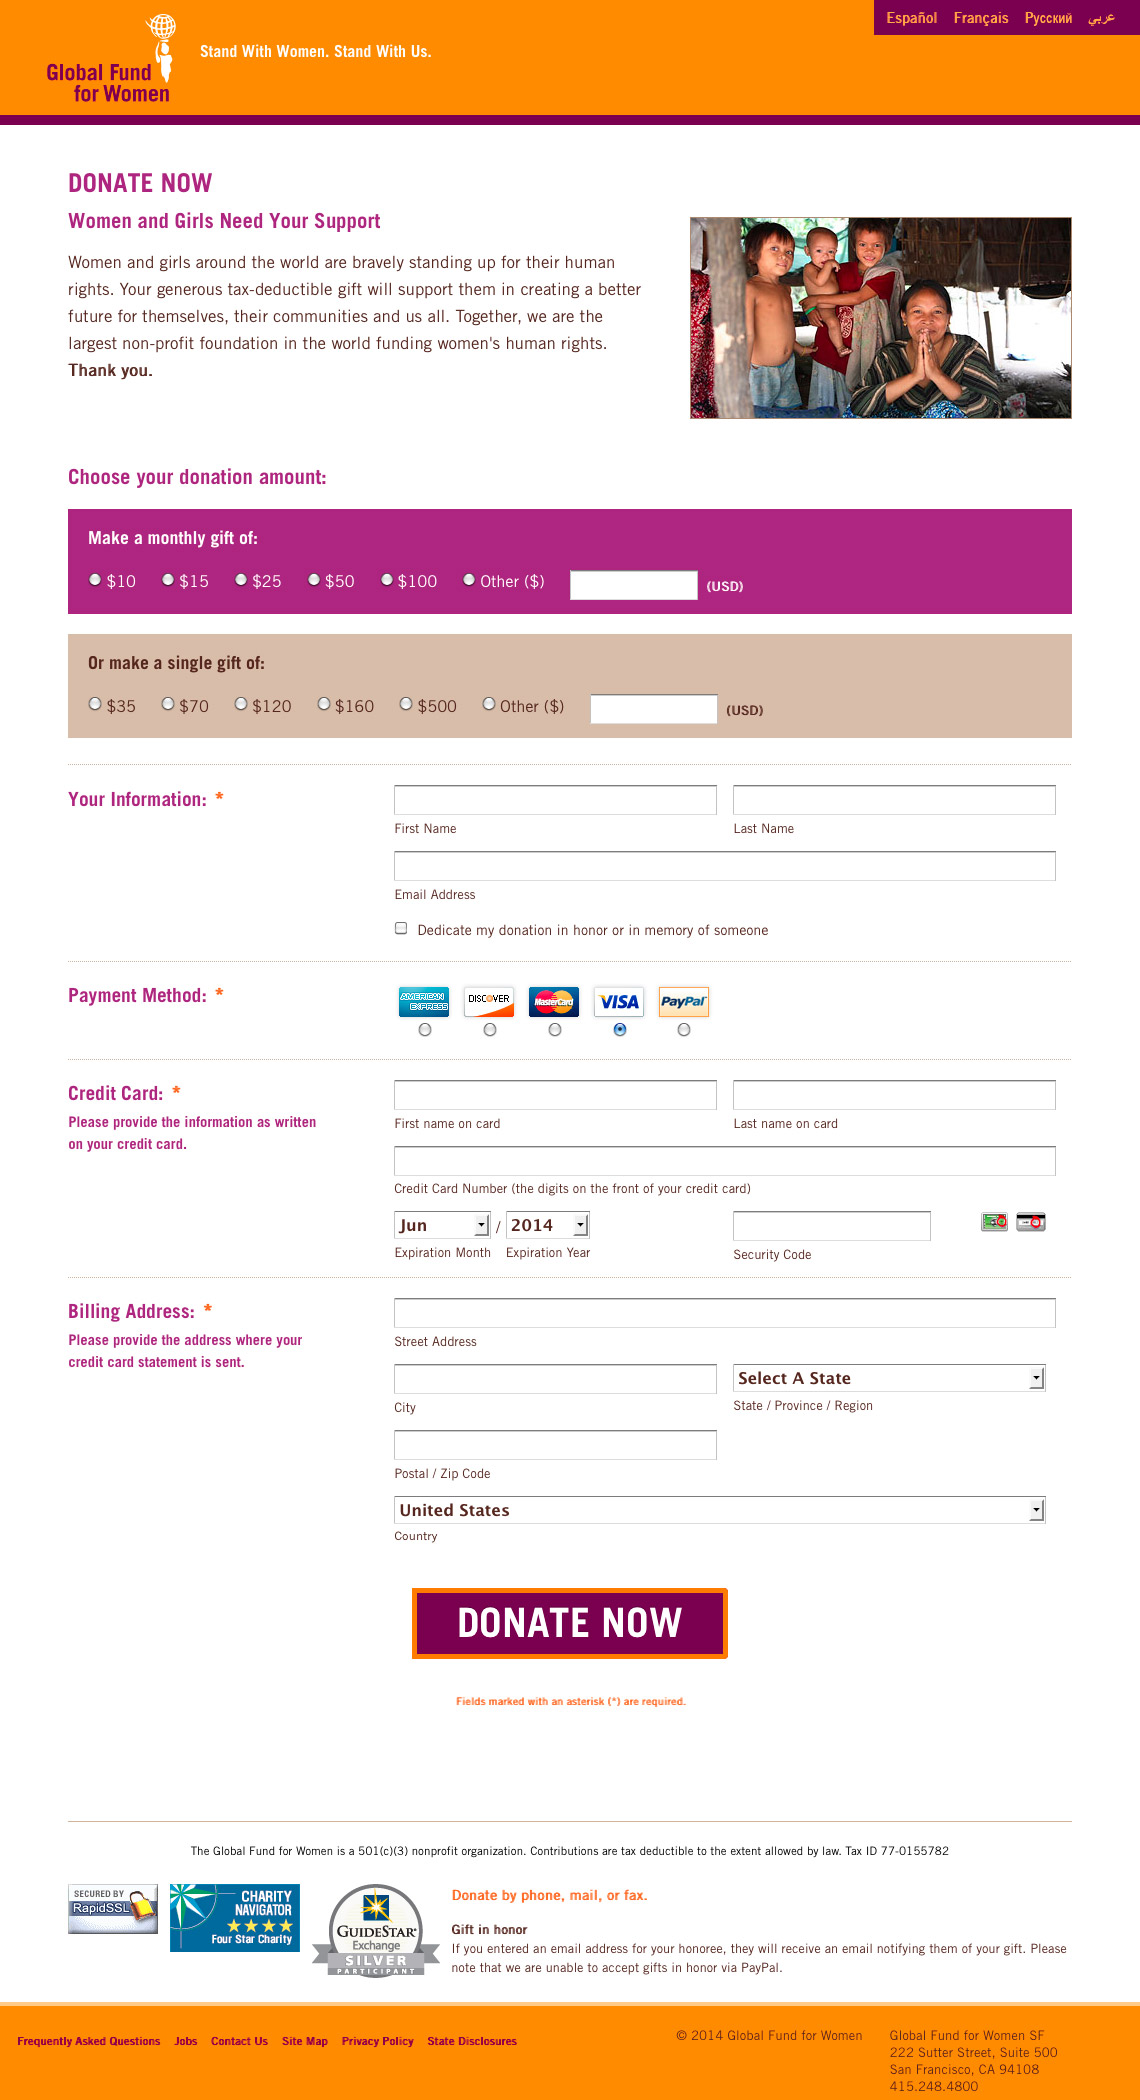 image of an online donate form with options for single and recurring gifts, and credit card or PayPal payments